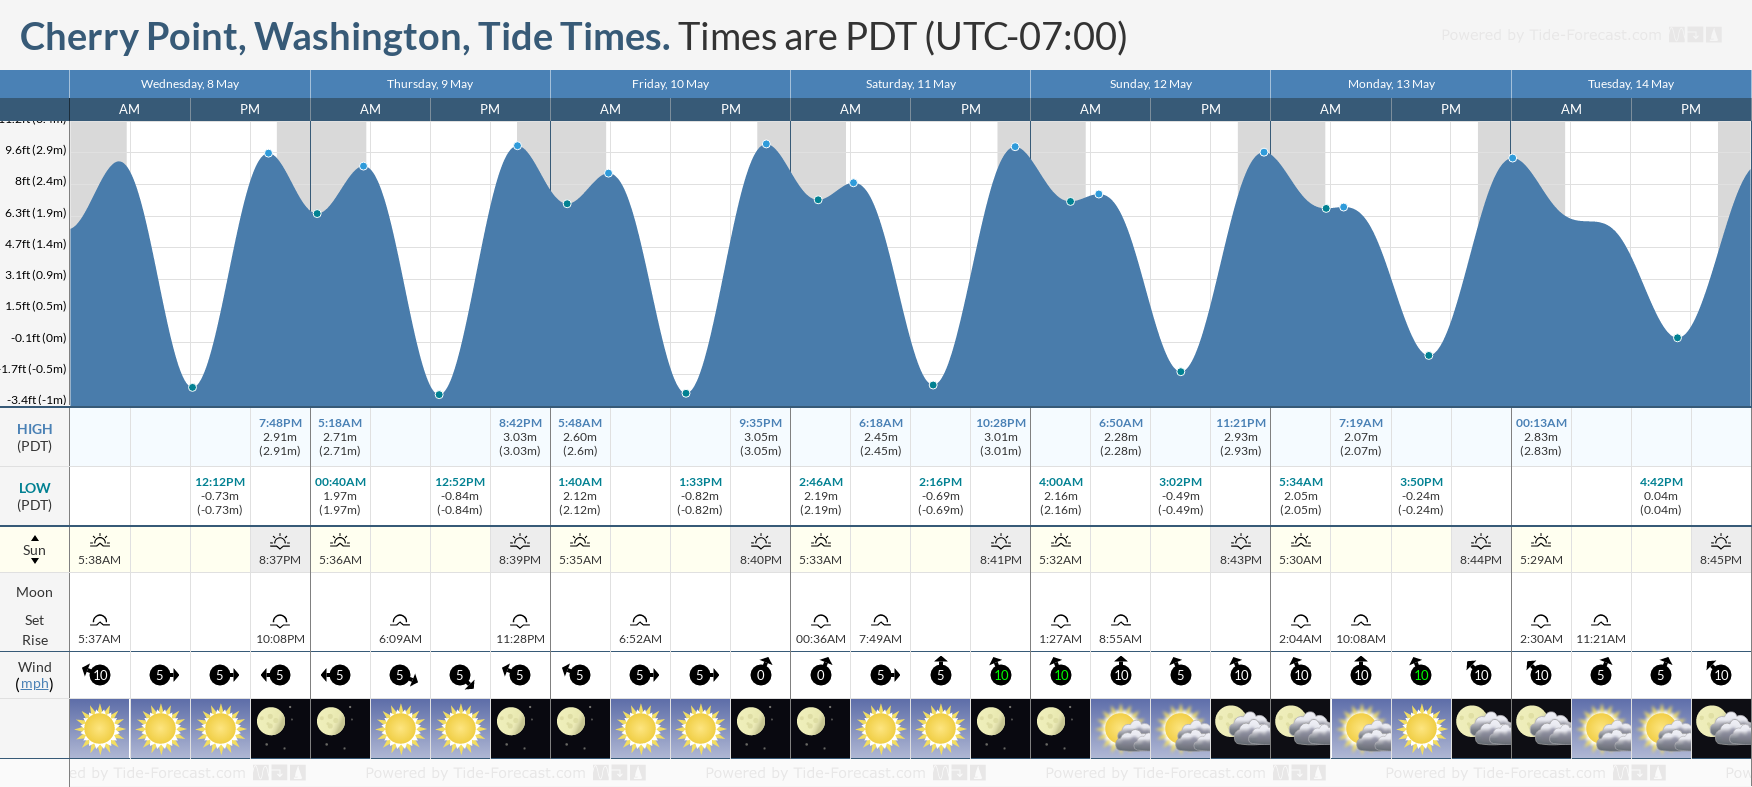 Cherry Point, Washington Tide Chart including high and low tide tide times for the next 7 days